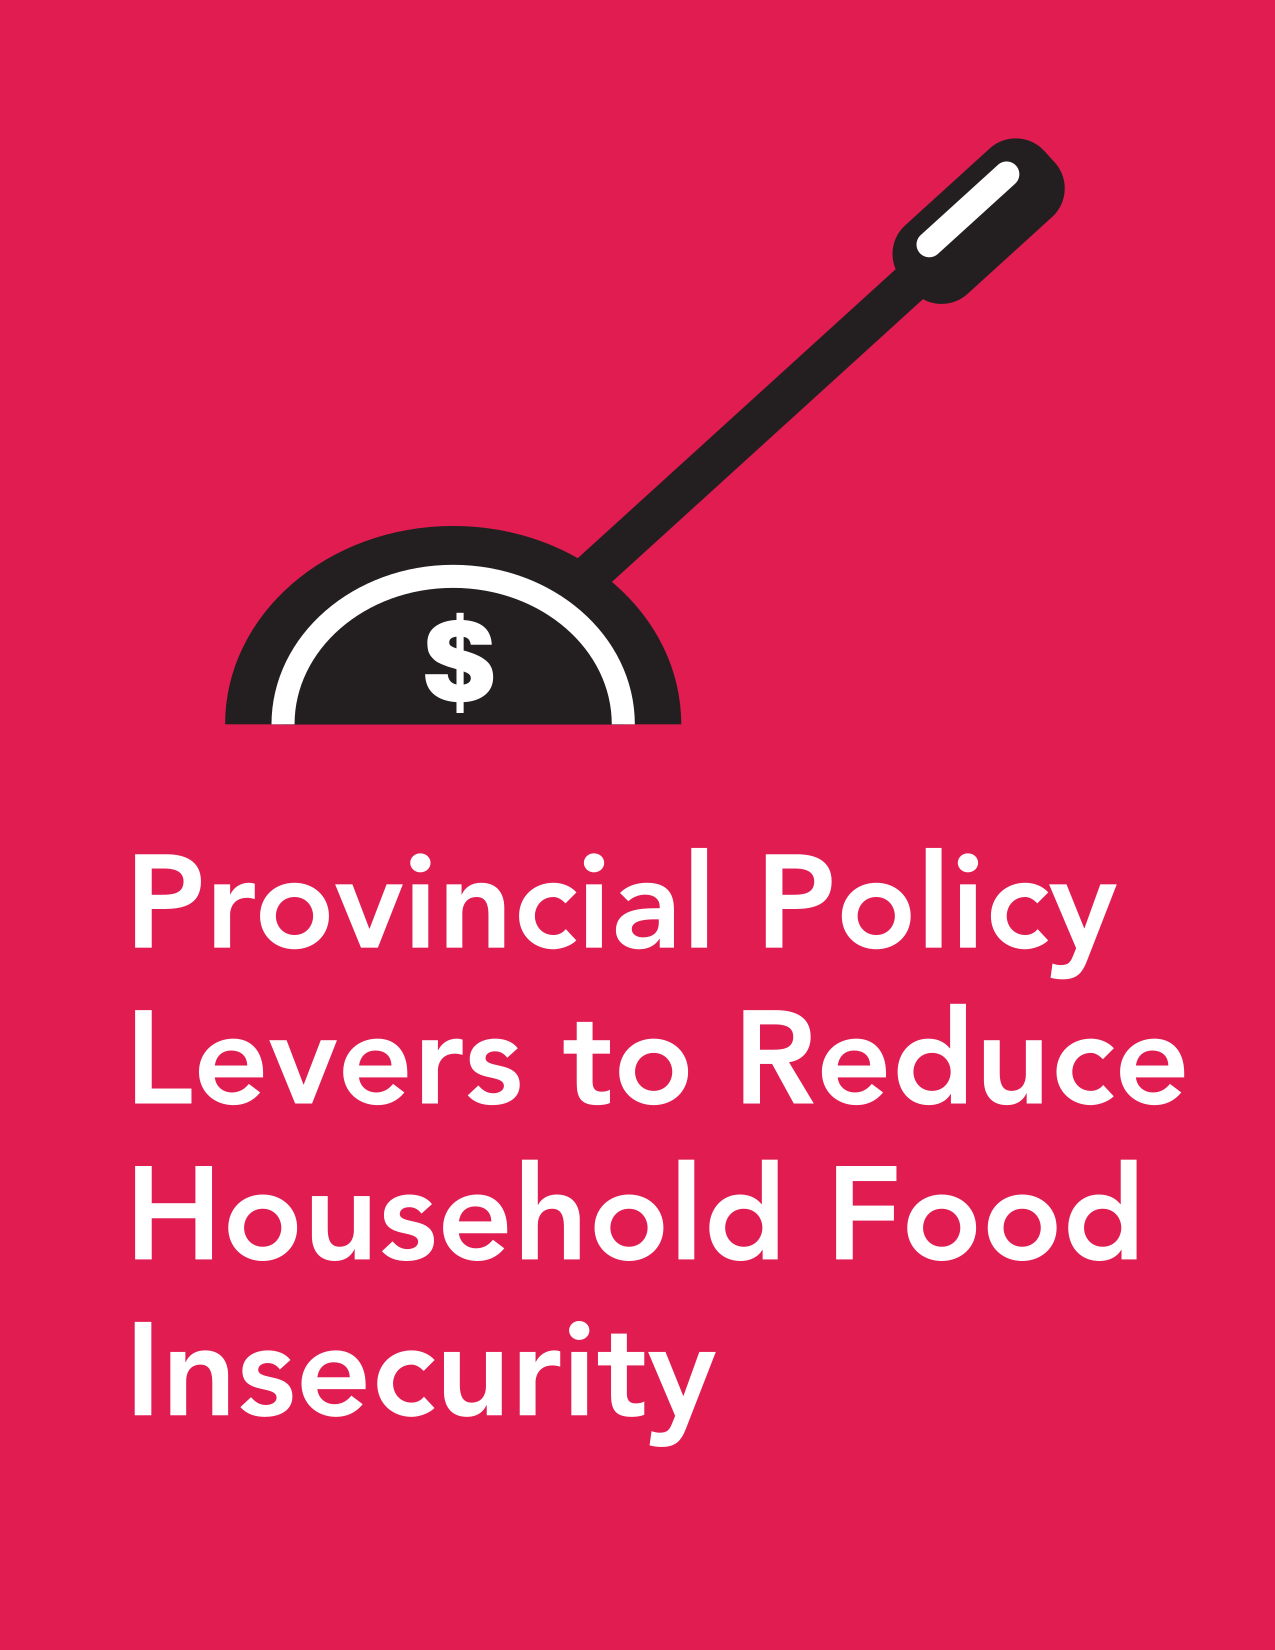 Fact Sheet: Provincial Policy Levers to Reduce Household Food Insecurity